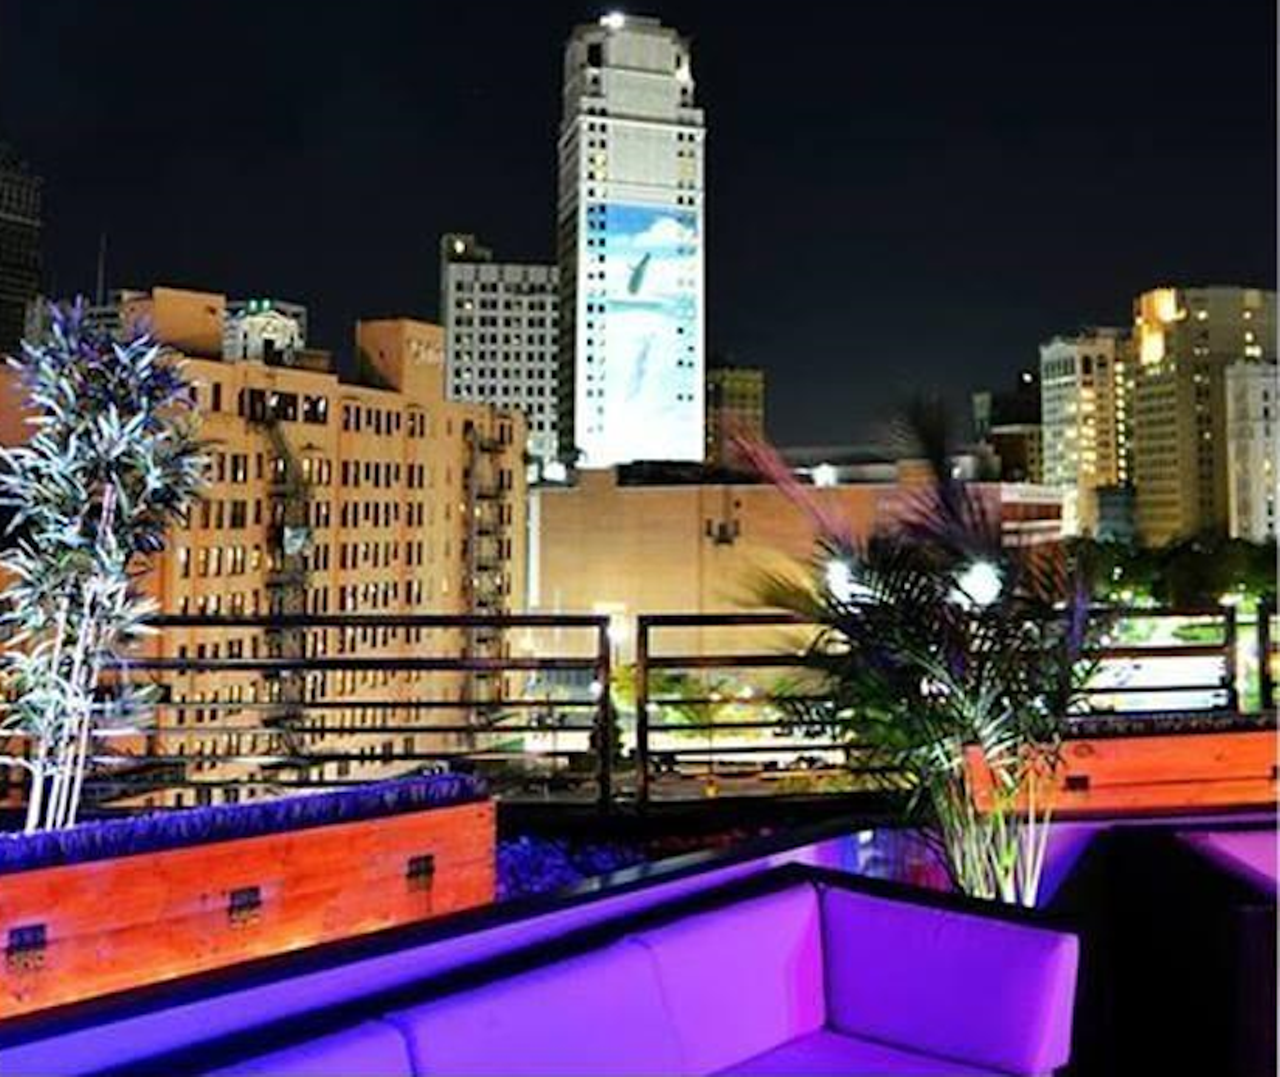 3Fifty Terrace
350 Madison St., Detroit; 313-687-435
A swanky rooftop lounge atop the Music Hall, 3Fifty Terrace offers adult vibes, great drinks, and a beautiful view of downtown Detroit.